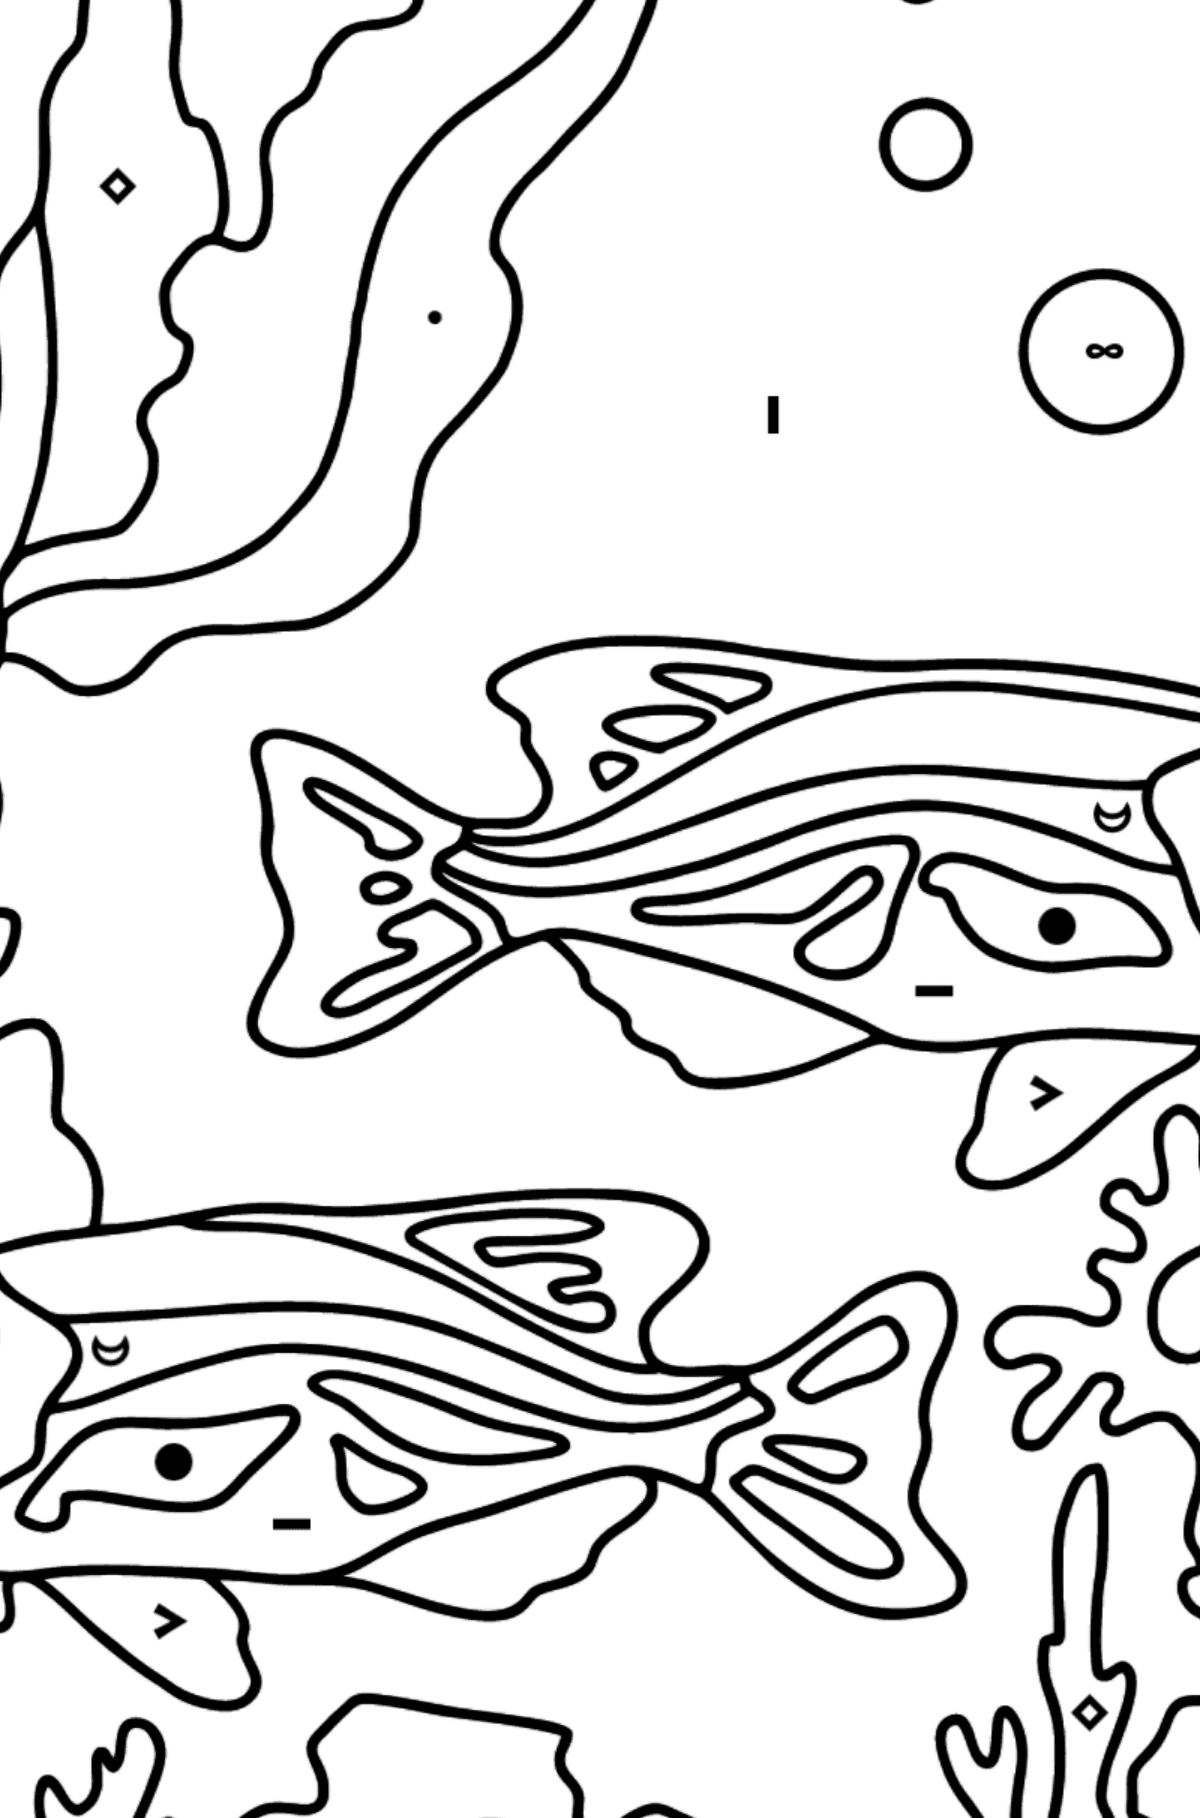 Coloring Page - Fish are Swimming Together Peacefully - Coloring by Symbols for Kids